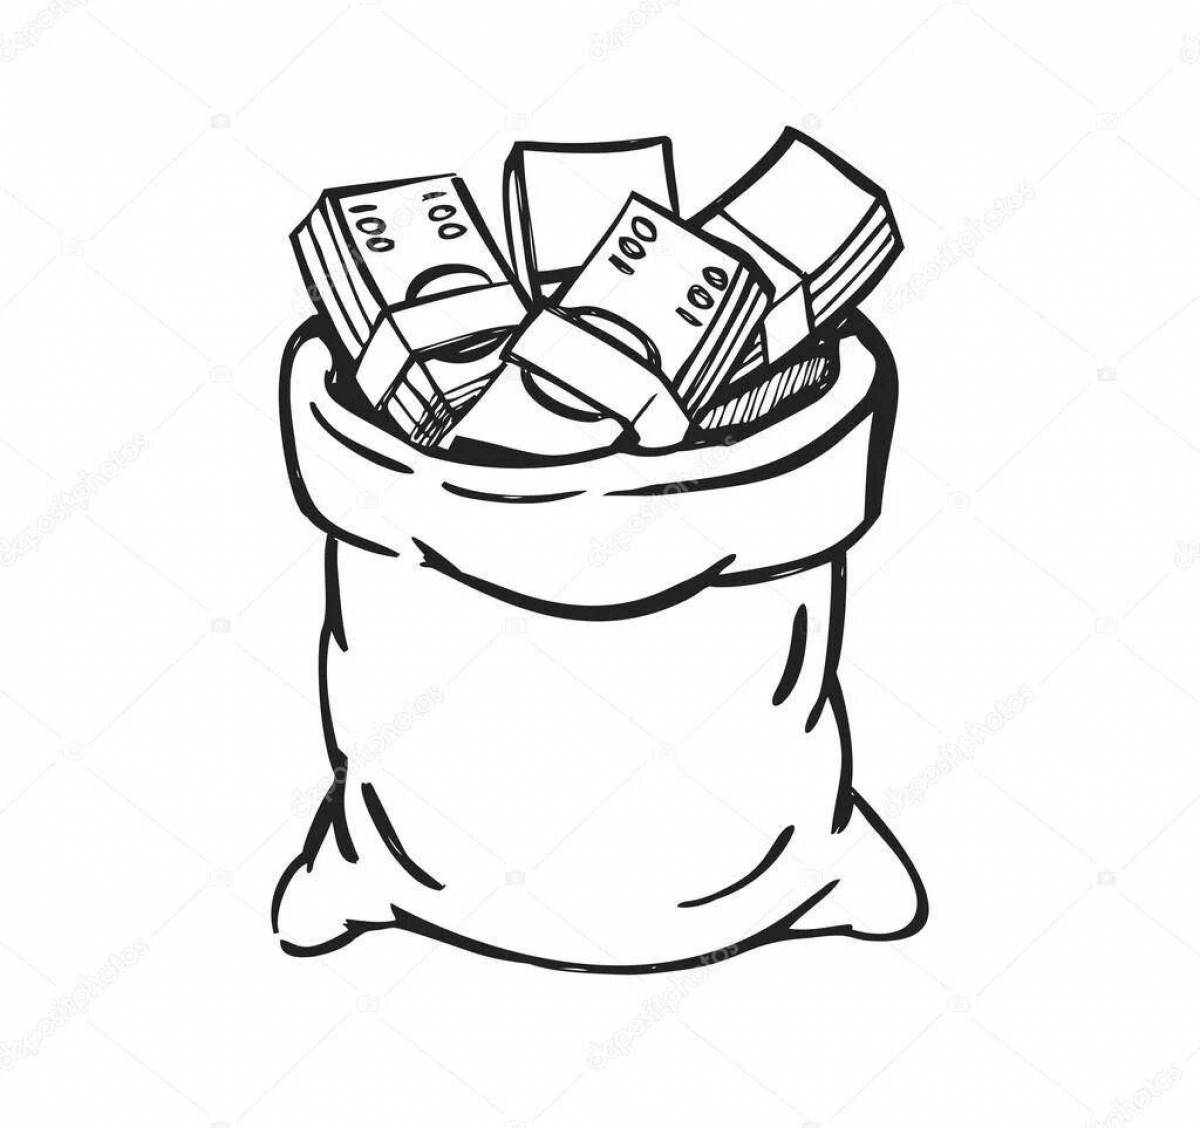 Colored shiny money bag coloring page